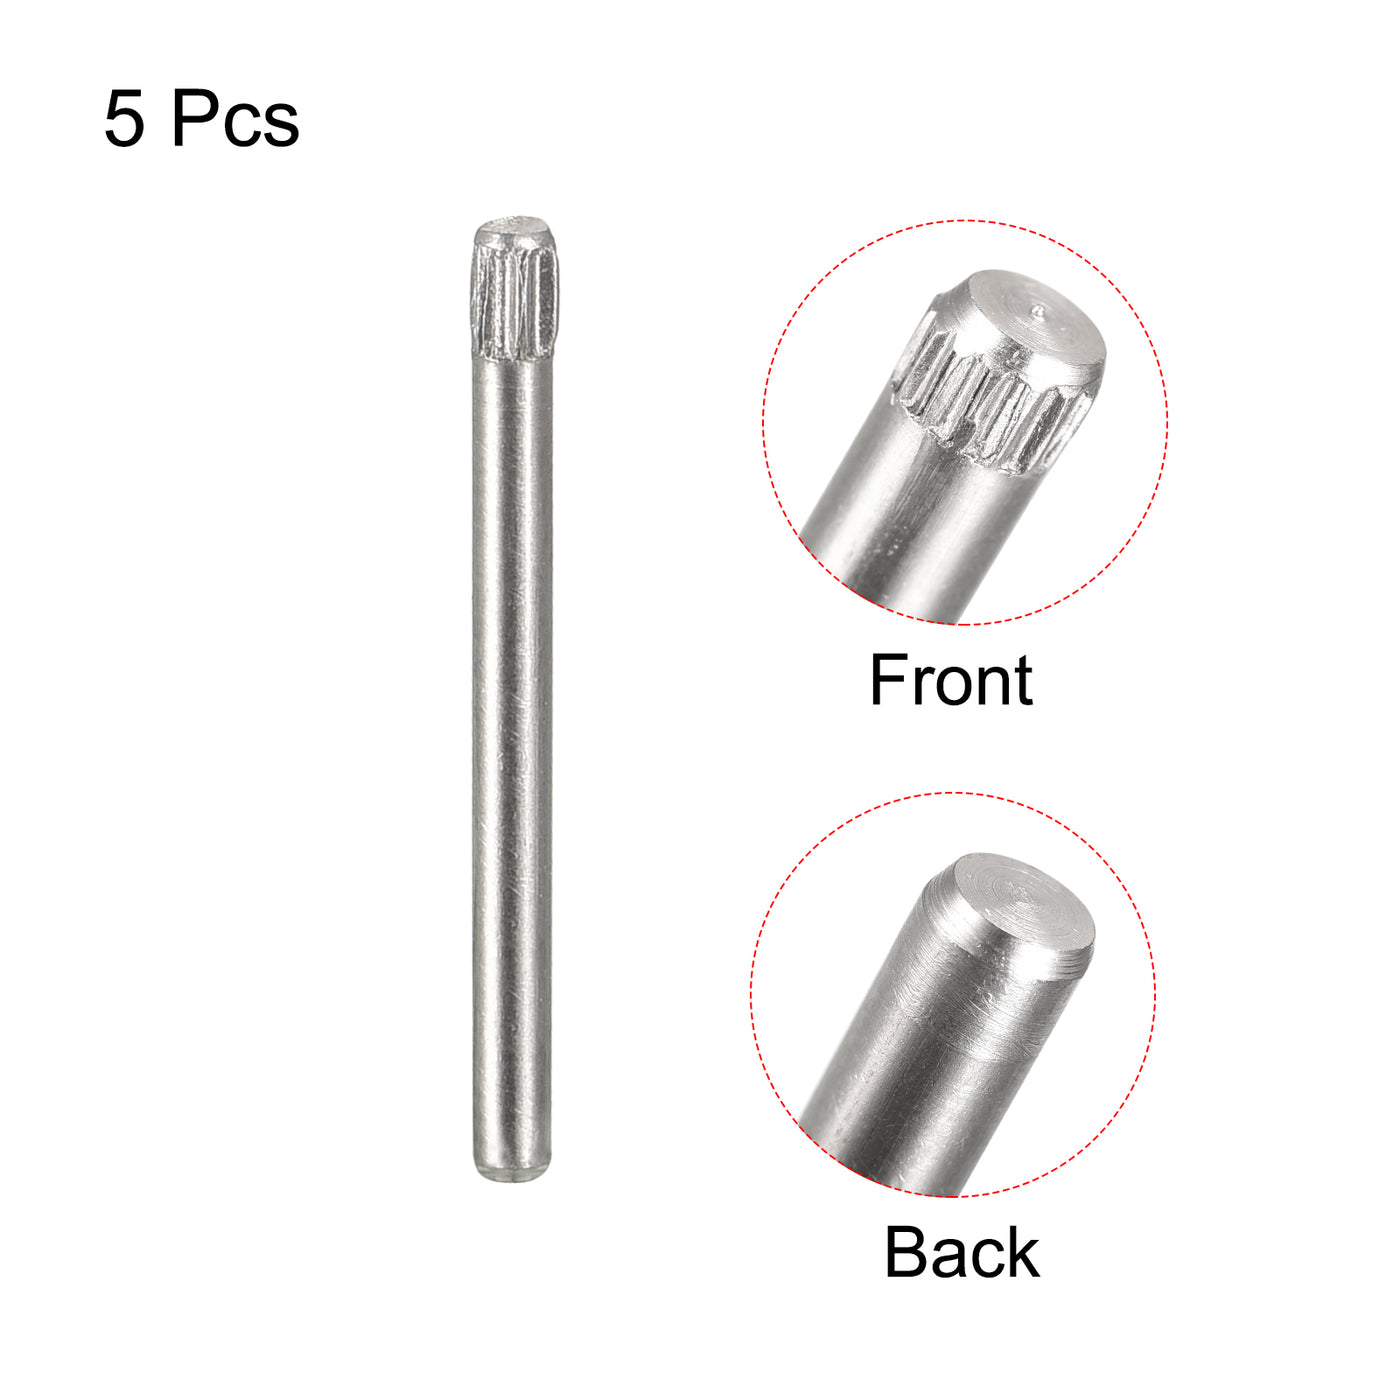 uxcell Uxcell 1.5x20mm 304 Stainless Steel Dowel Pins, 5Pcs Knurled Head Flat End Dowel Pin